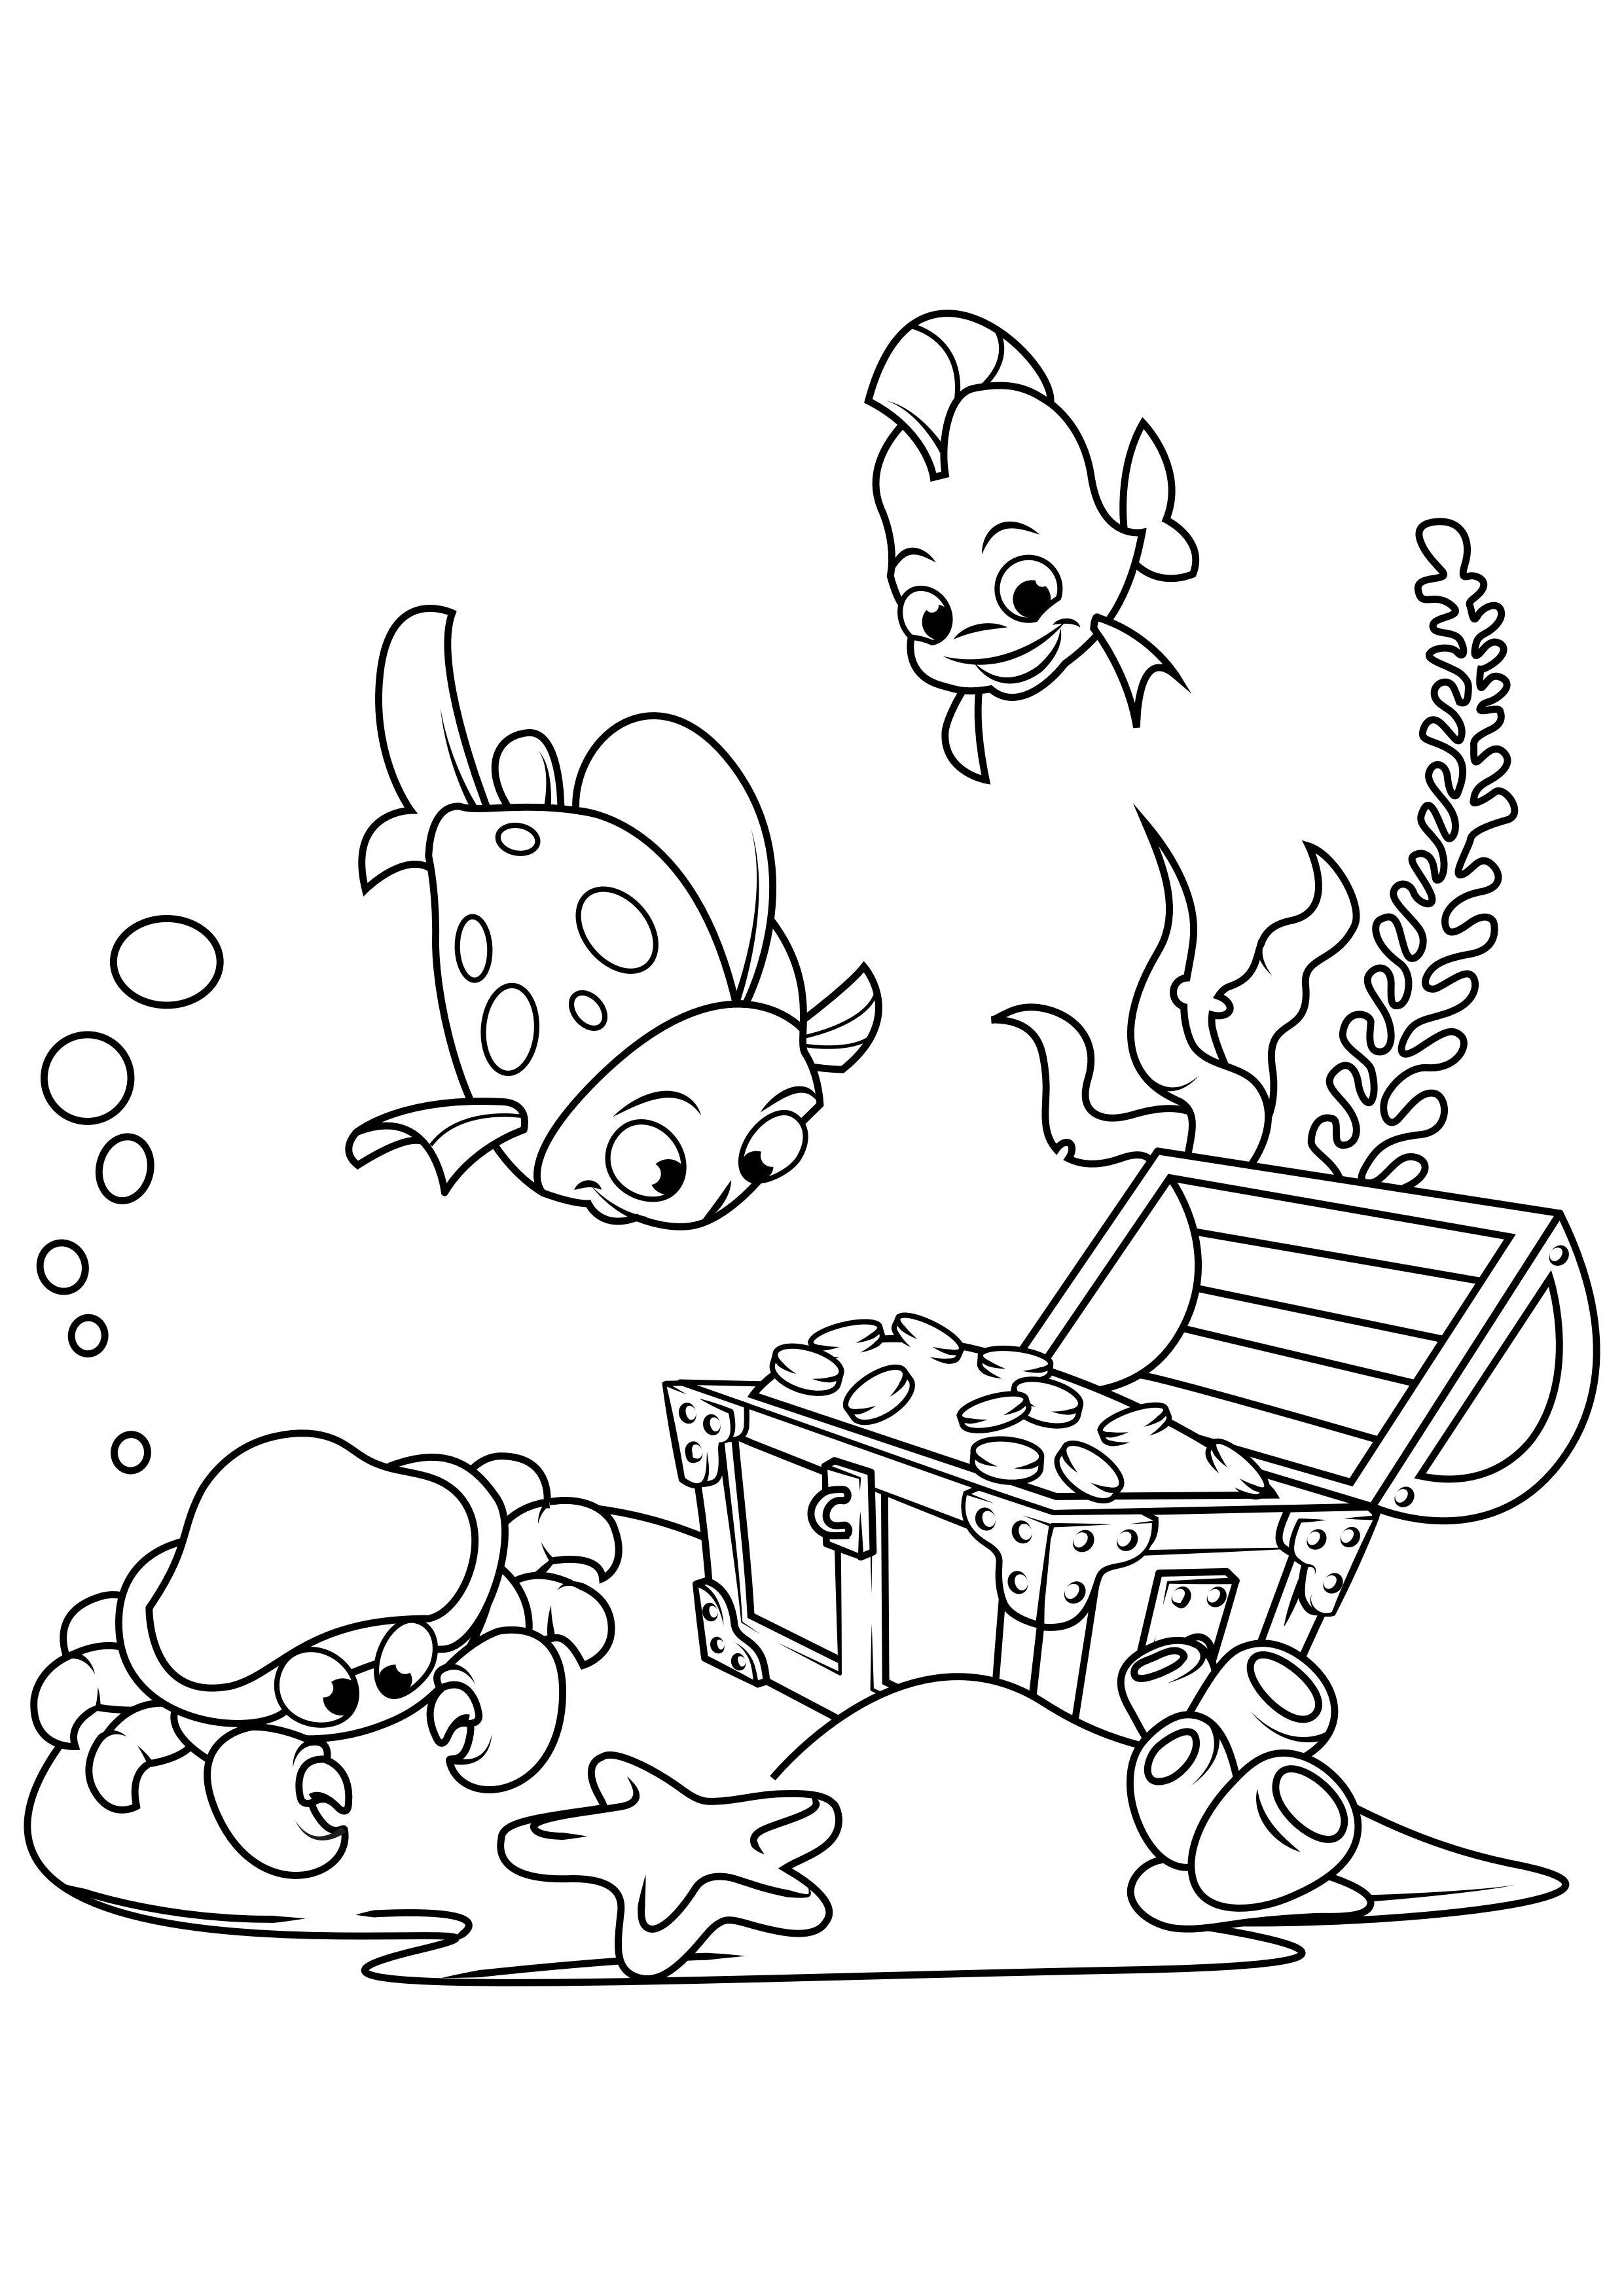 Coloring page fish and crab find treasure